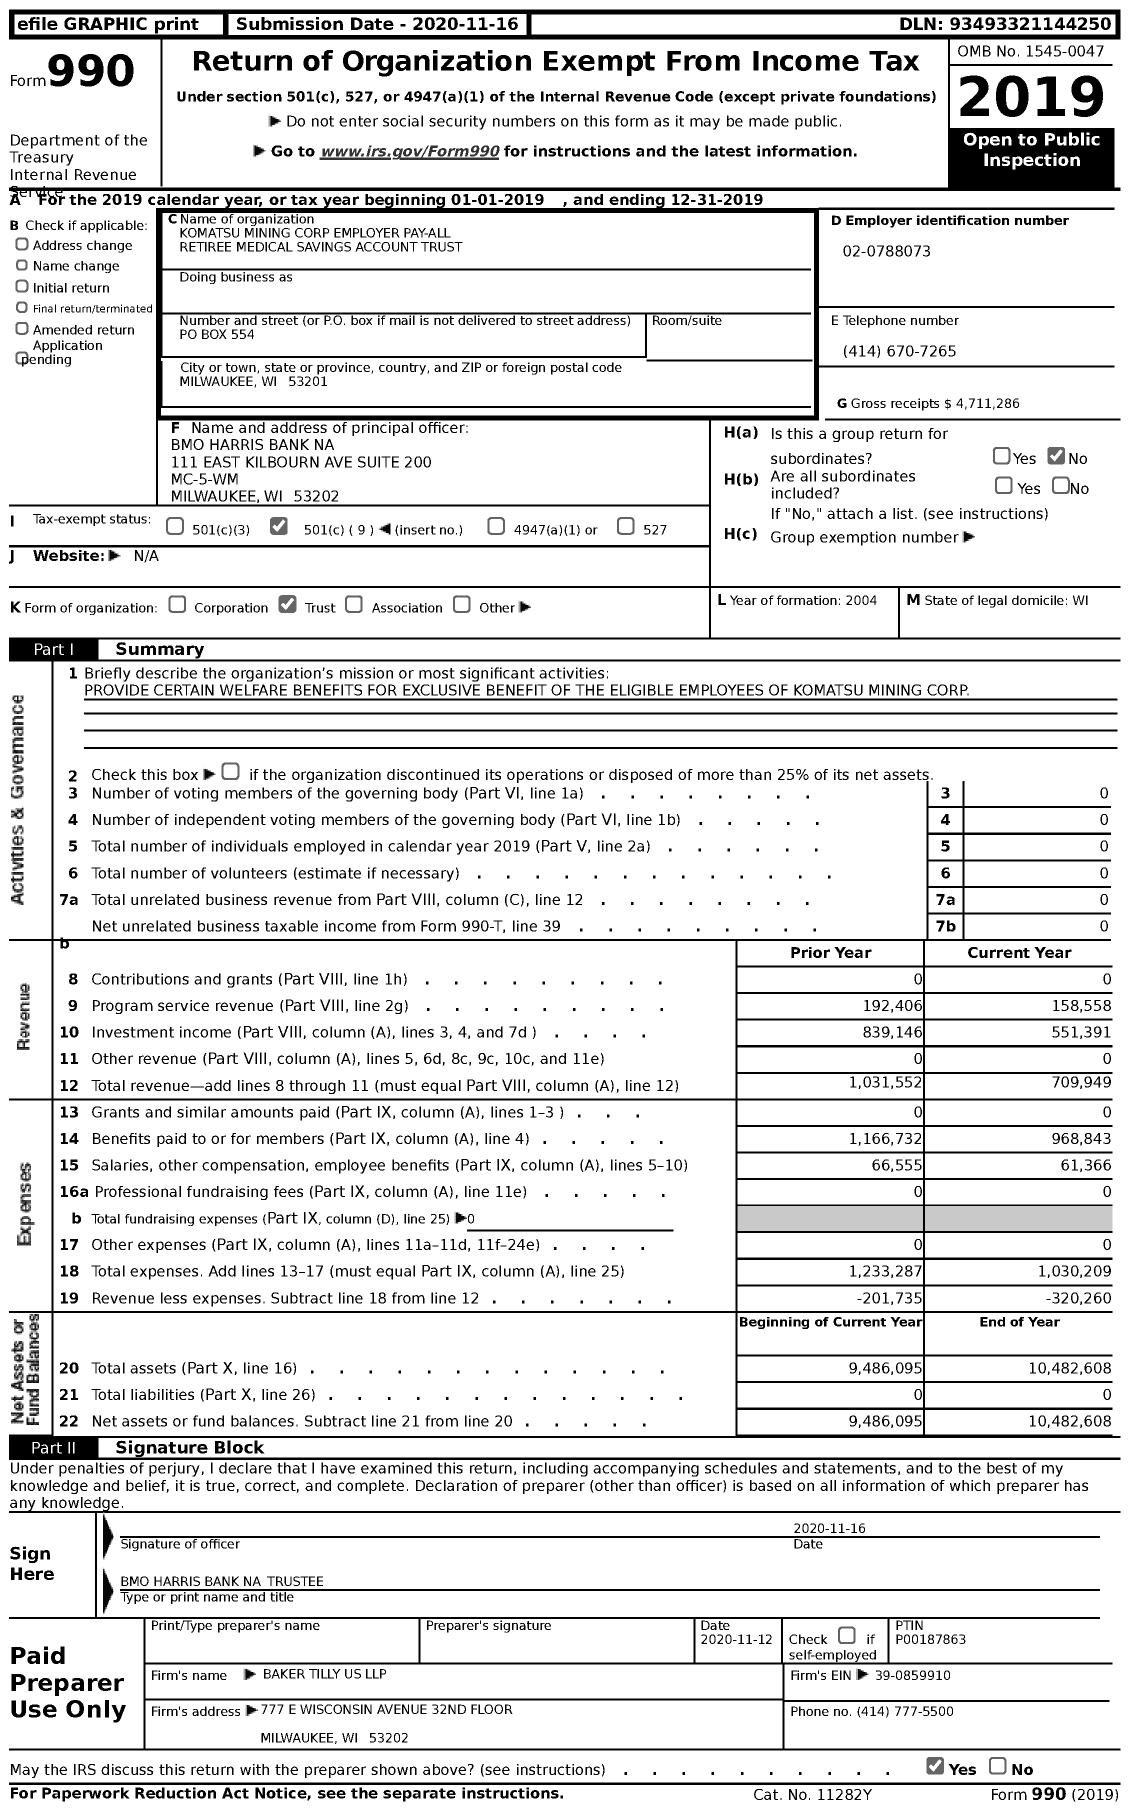 Image of first page of 2019 Form 990 for Komatsu Mining Corp Employer Pay-All Retiree Medical Savings Account Trust